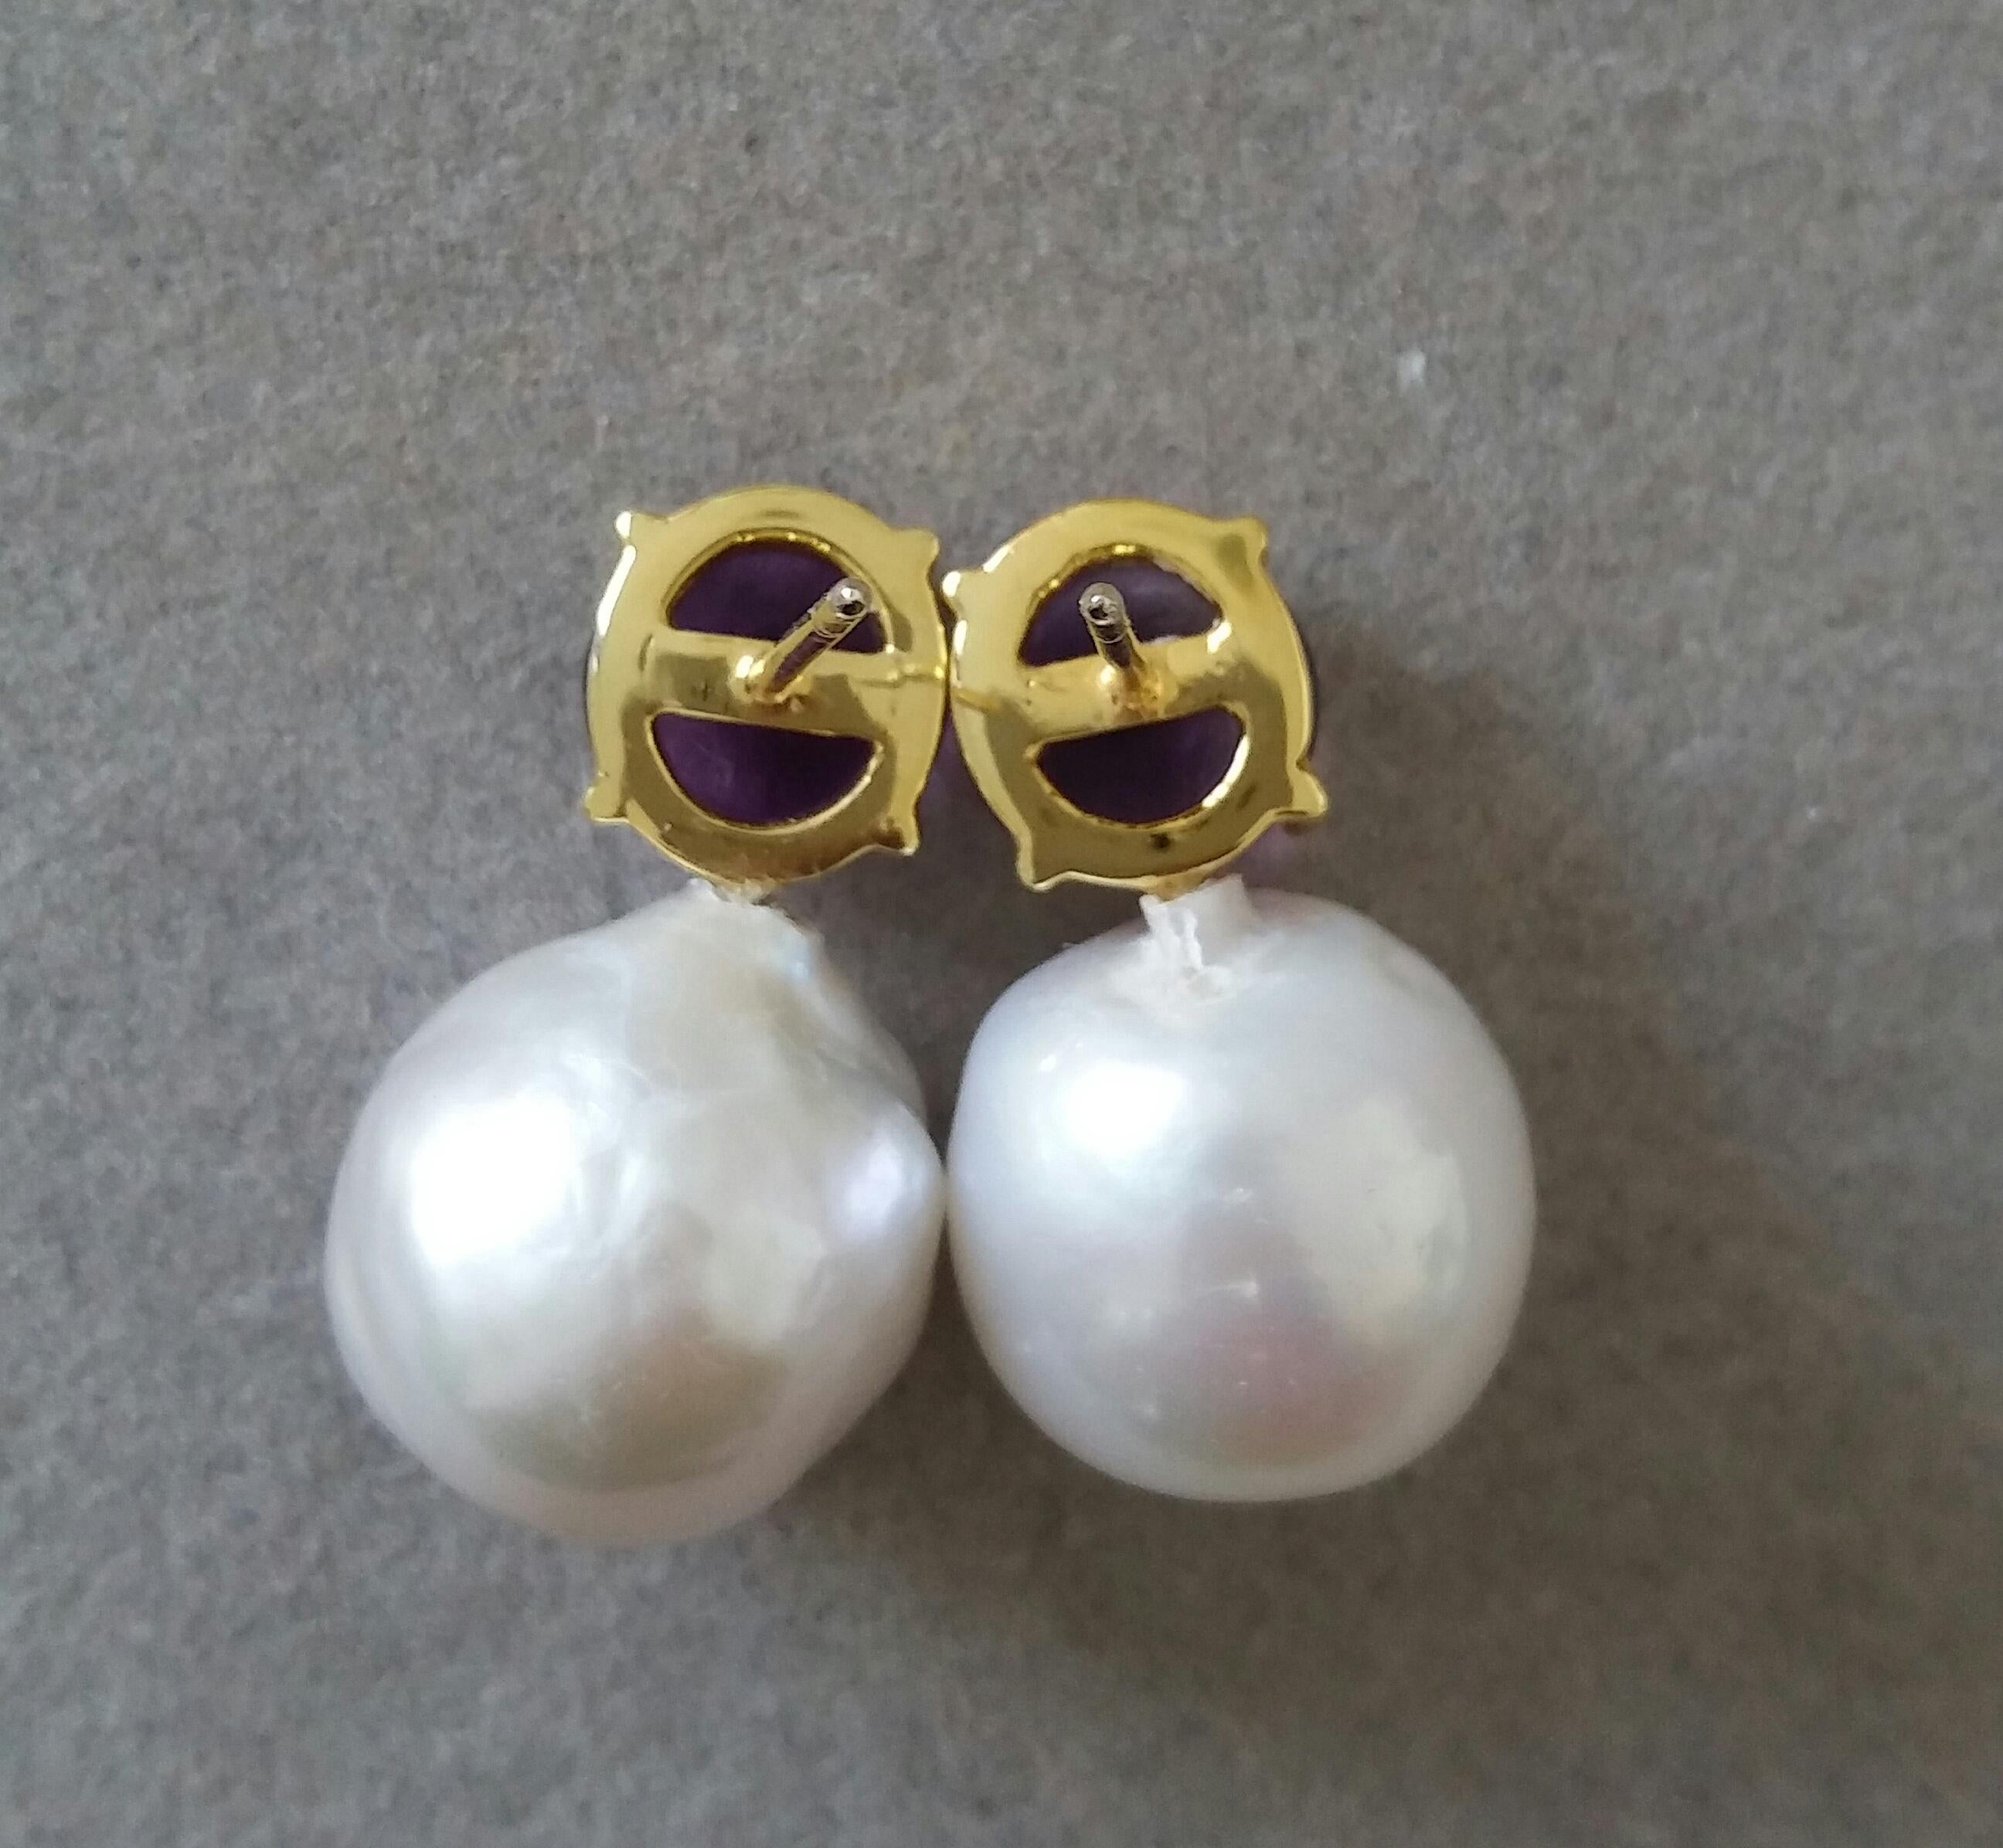 Big Size White Baroque Pearls Round Amethyst Cabochons Yellow Gold Earrings In Good Condition For Sale In Bangkok, TH